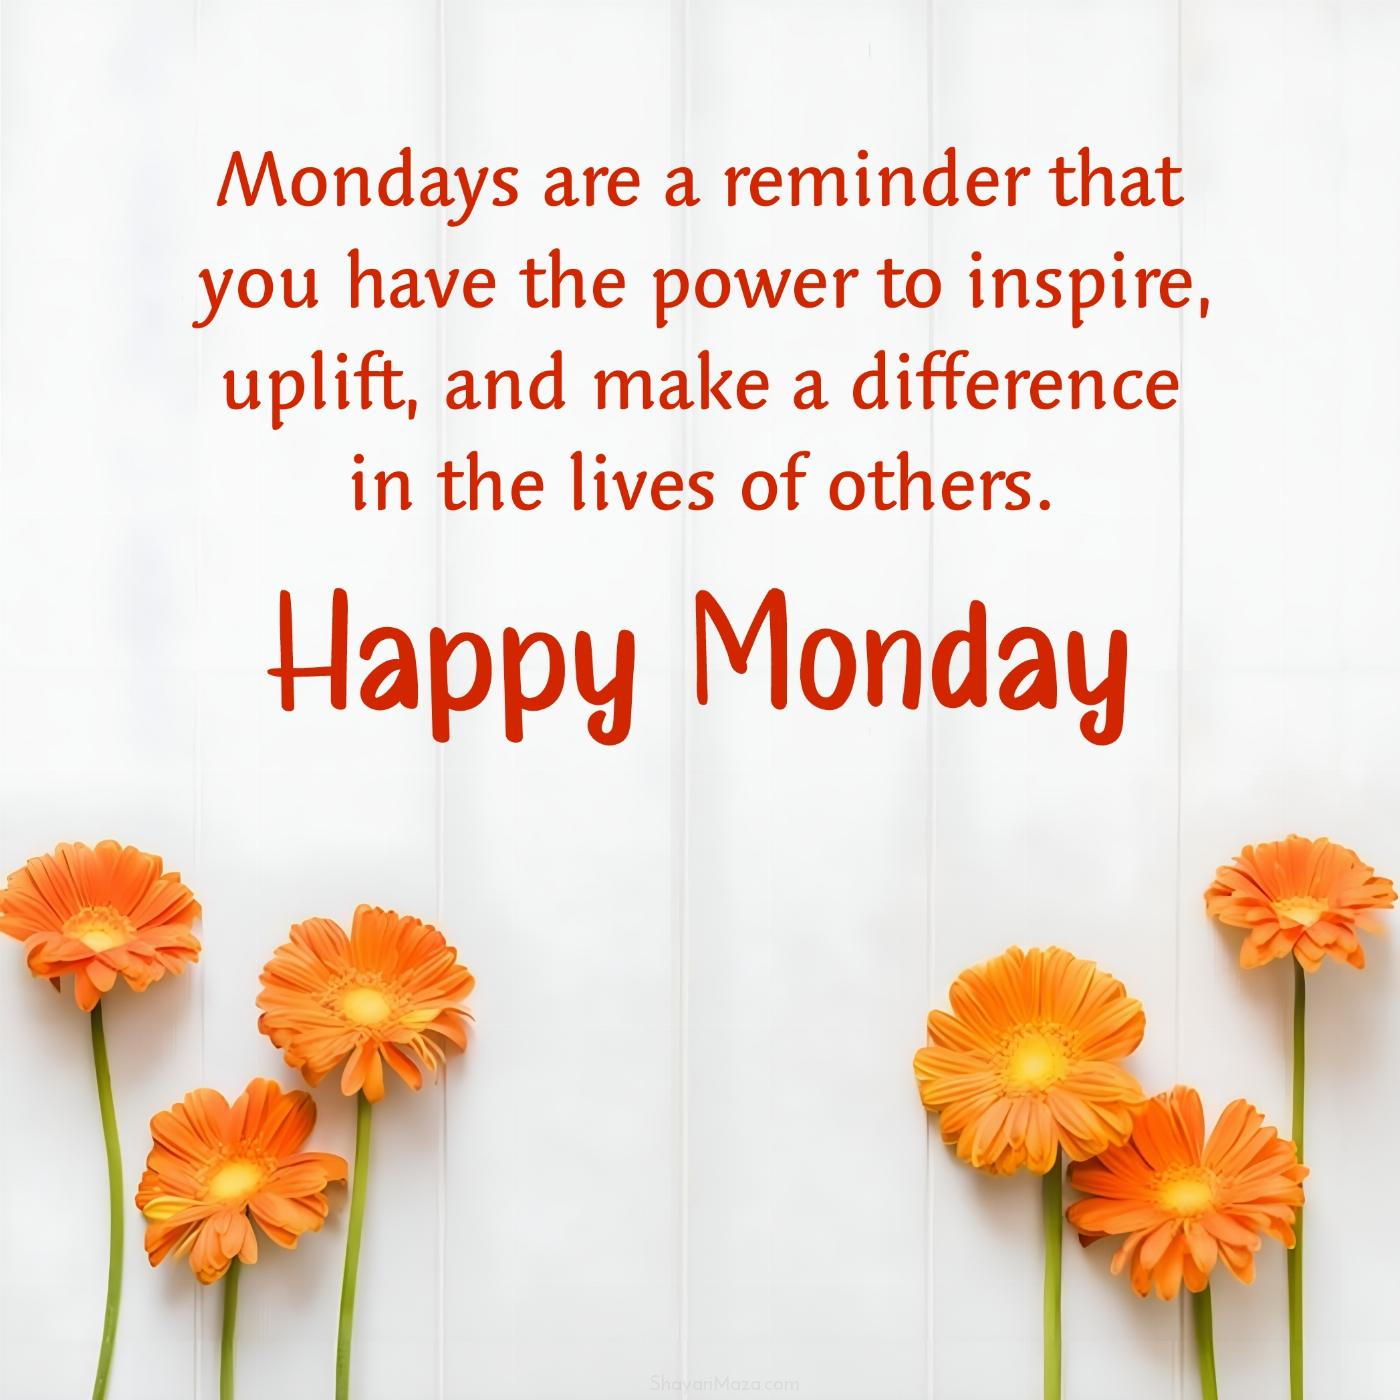 Mondays are a reminder that you have the power to inspire